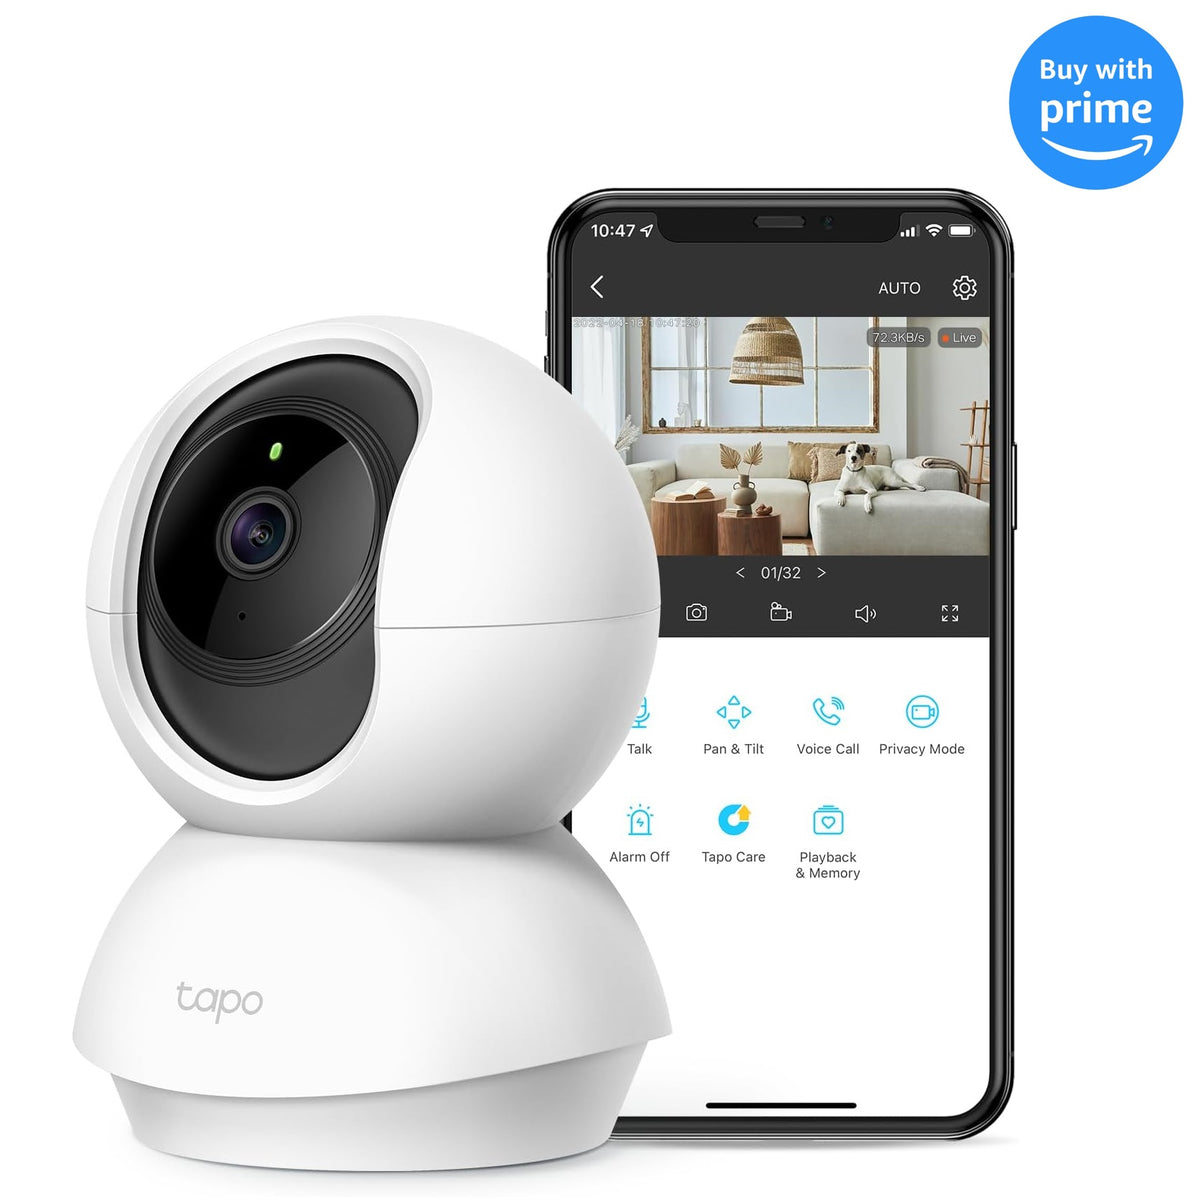 TP Link Tapo C500 Outdoor Pan/Tilt WiFi Camera 1080p Full HD 360° View, Motion Tracking, Weatherproof Two-Way Audio